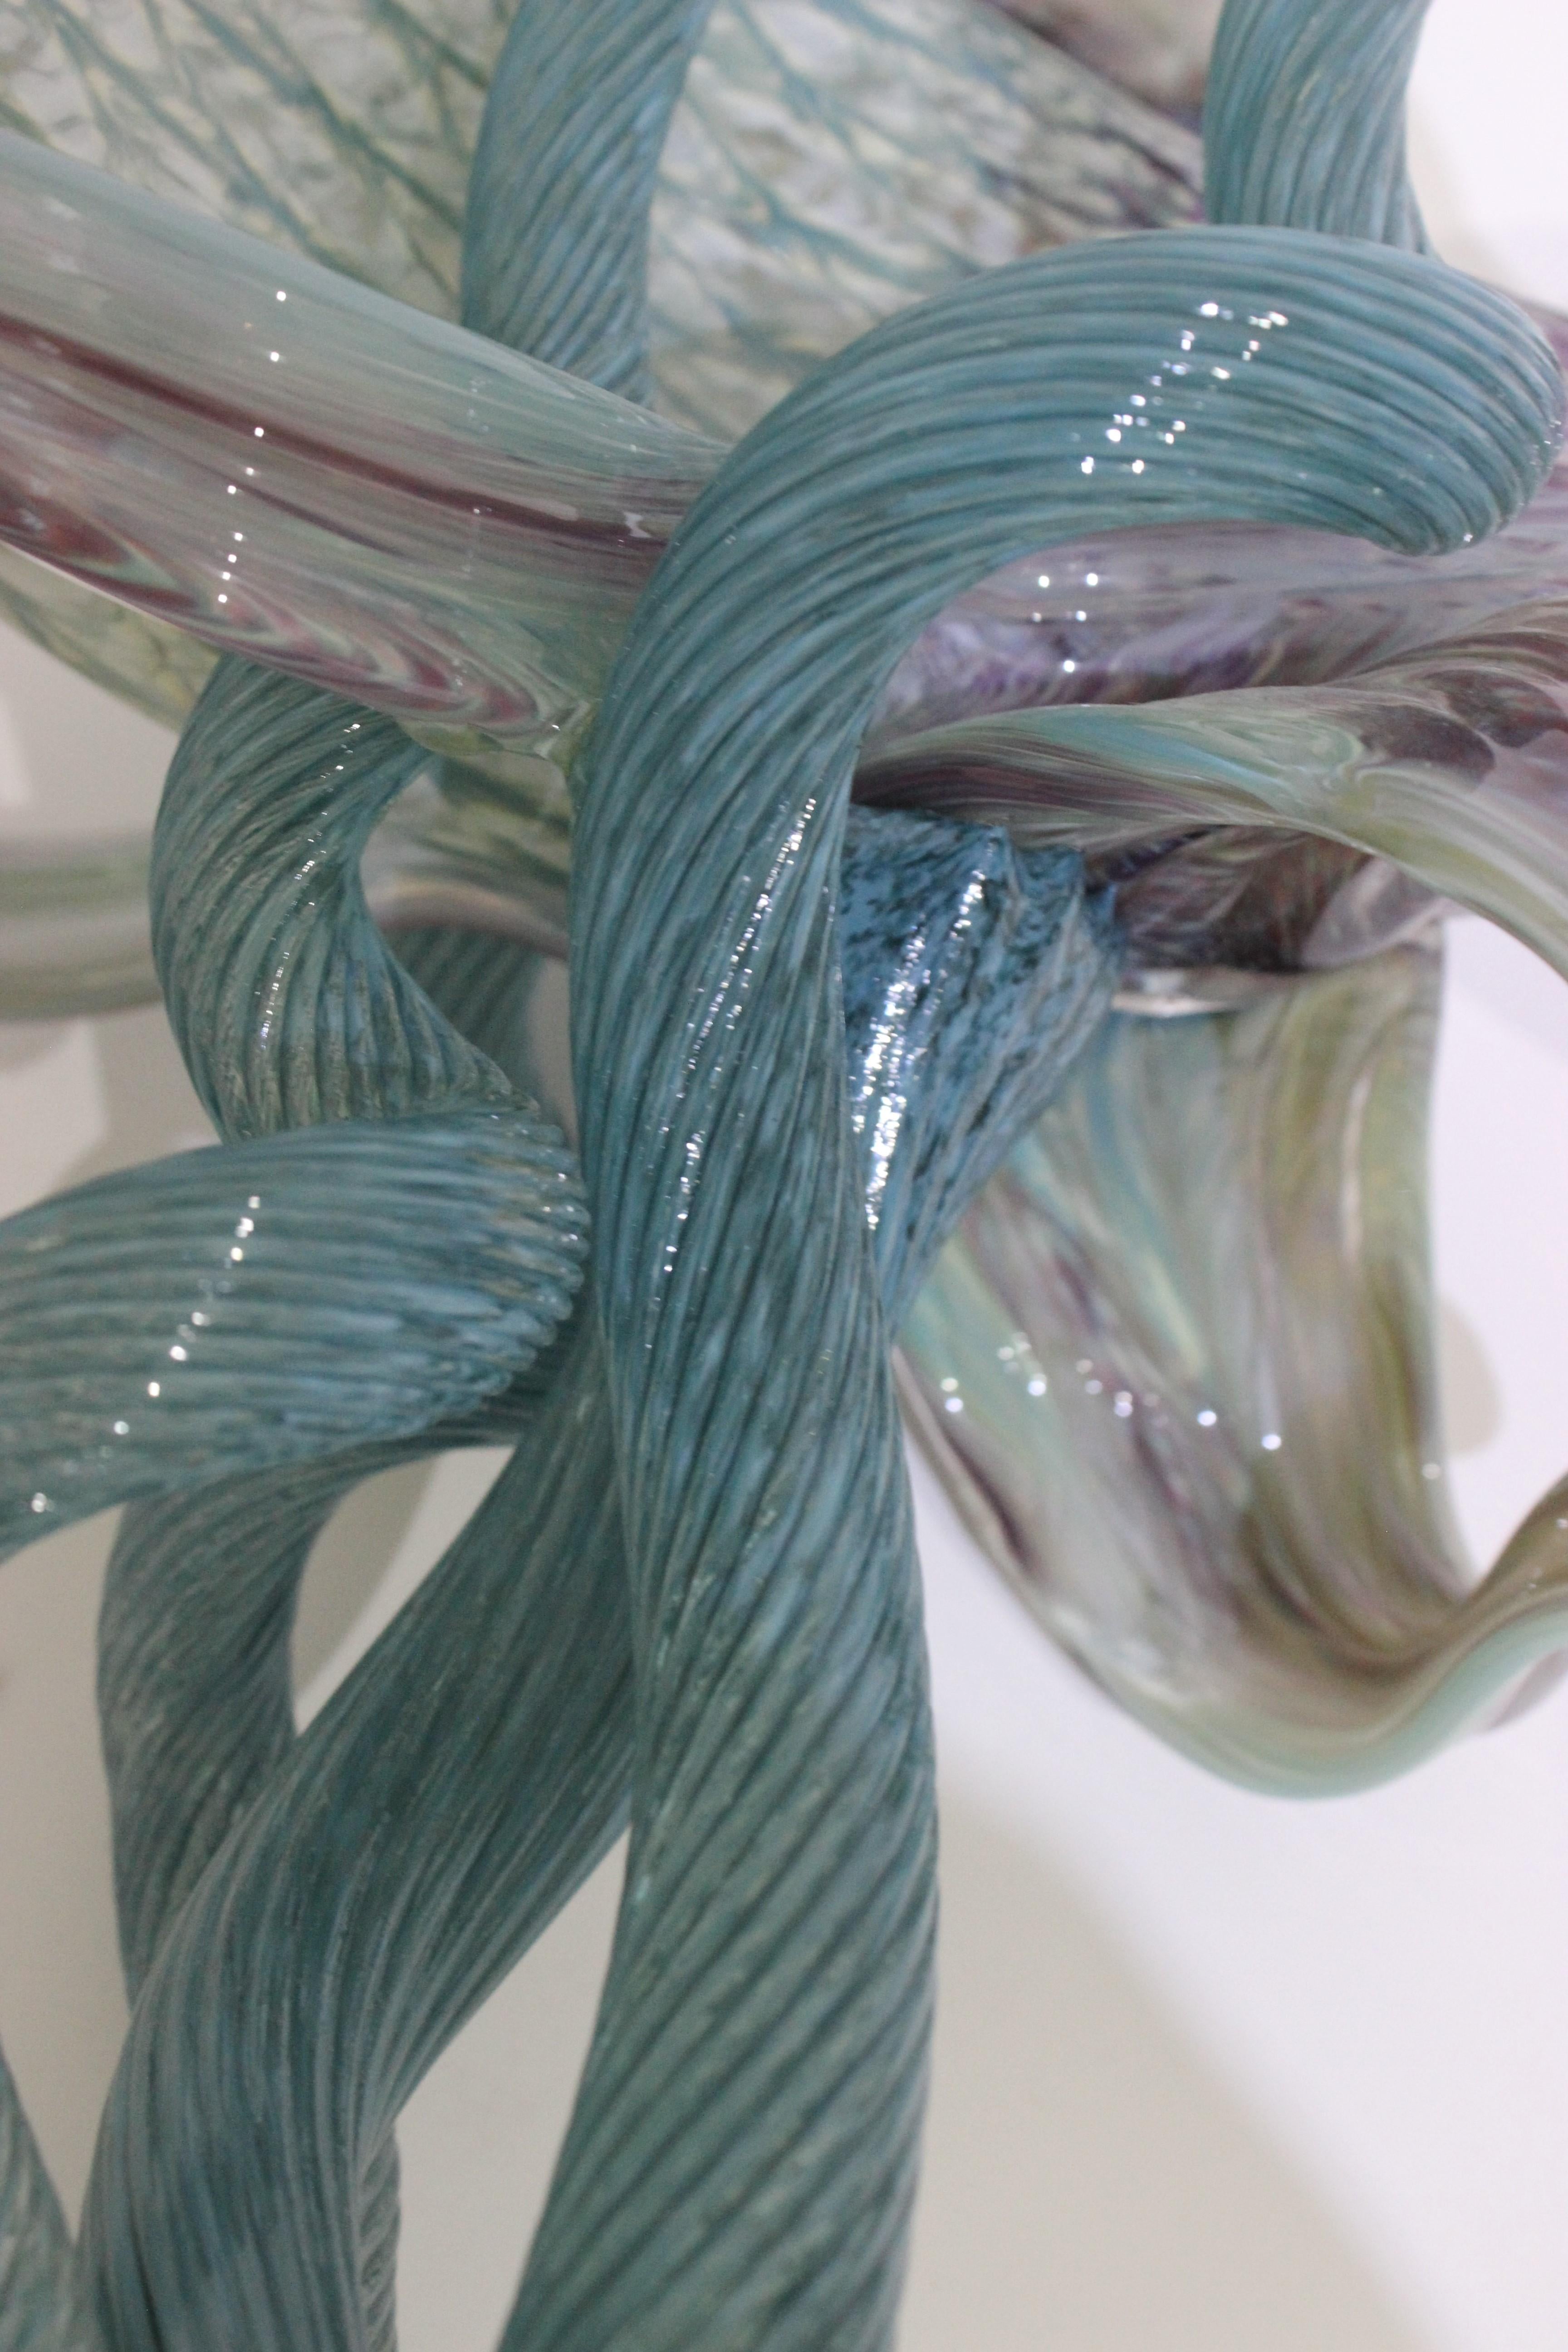 Glass Sculpture of an Exotic Fish 5